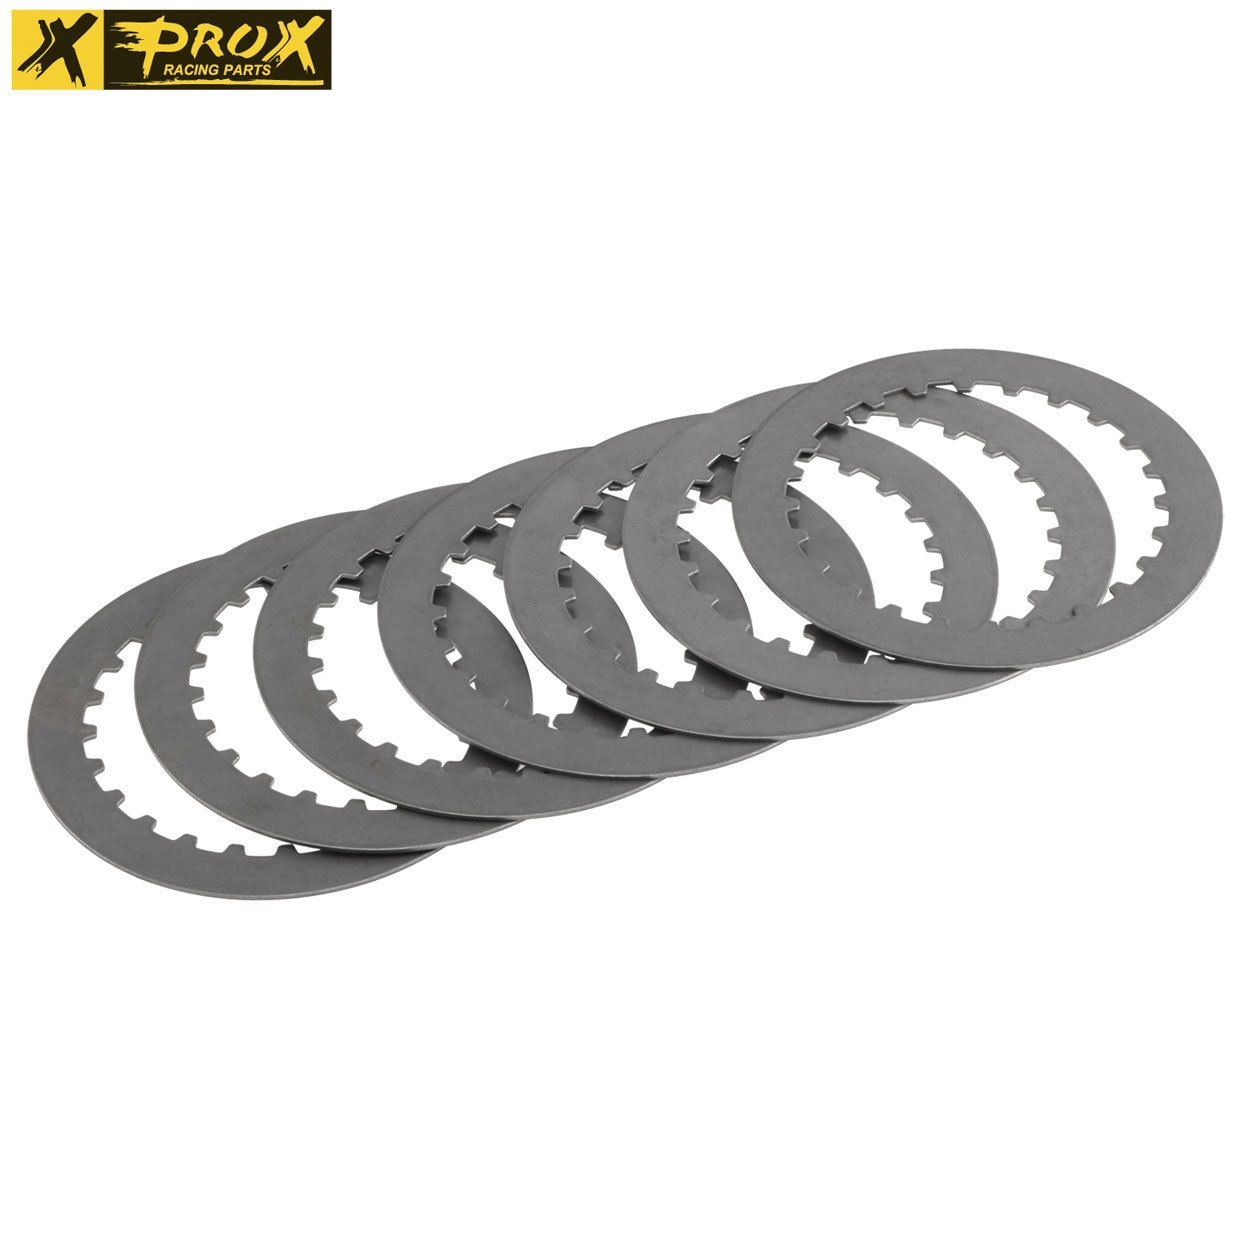 ProX Friction Plate Set KTM125/144/150/200SX-EXC ’98-18 - ProX Racing Parts